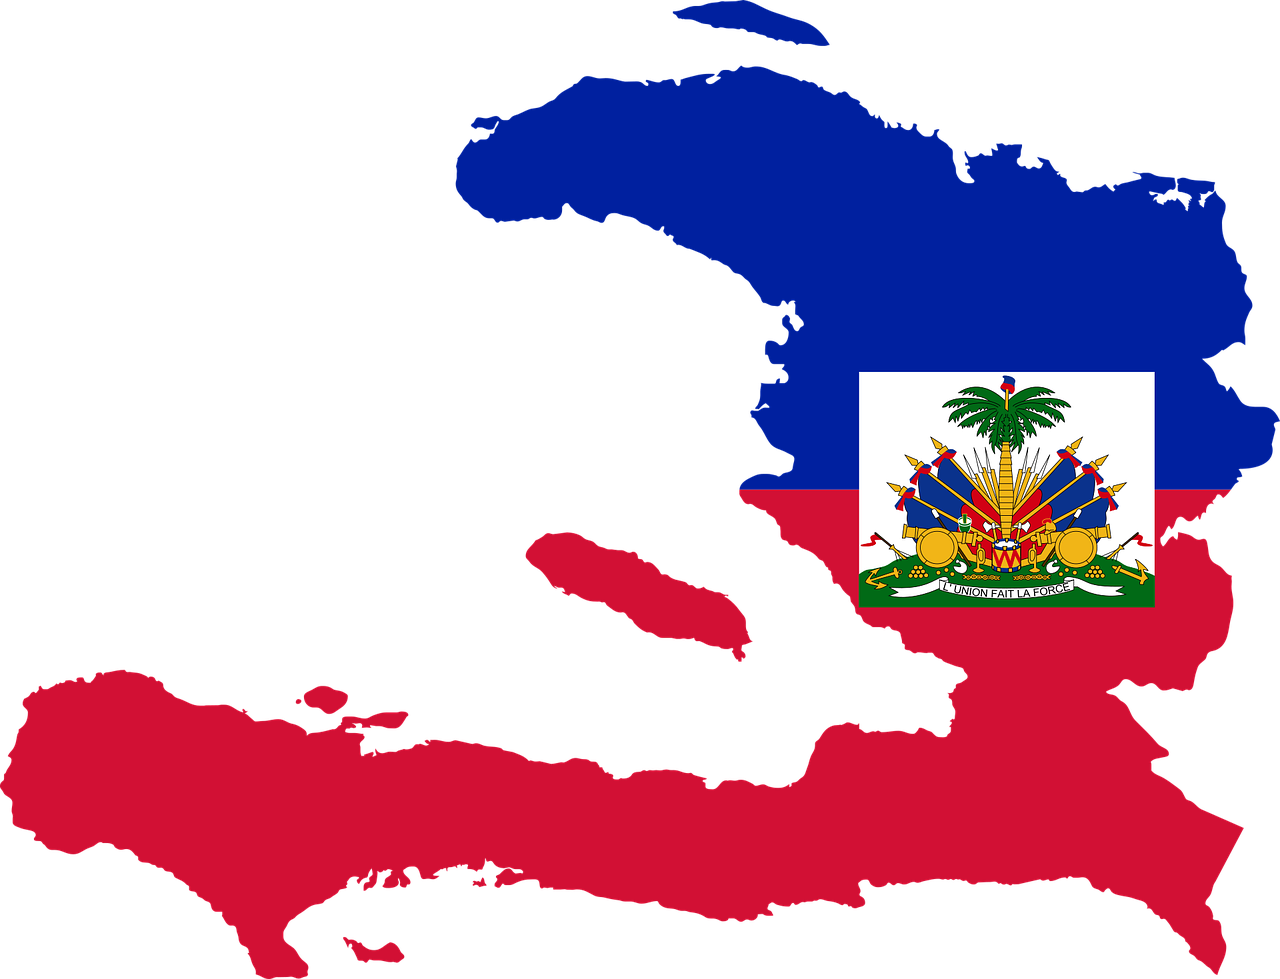 a map of haiti with the flag of the country, a photo, flickr, fine art, cobalt blue and pyrrol red, onyx, a dark, palm